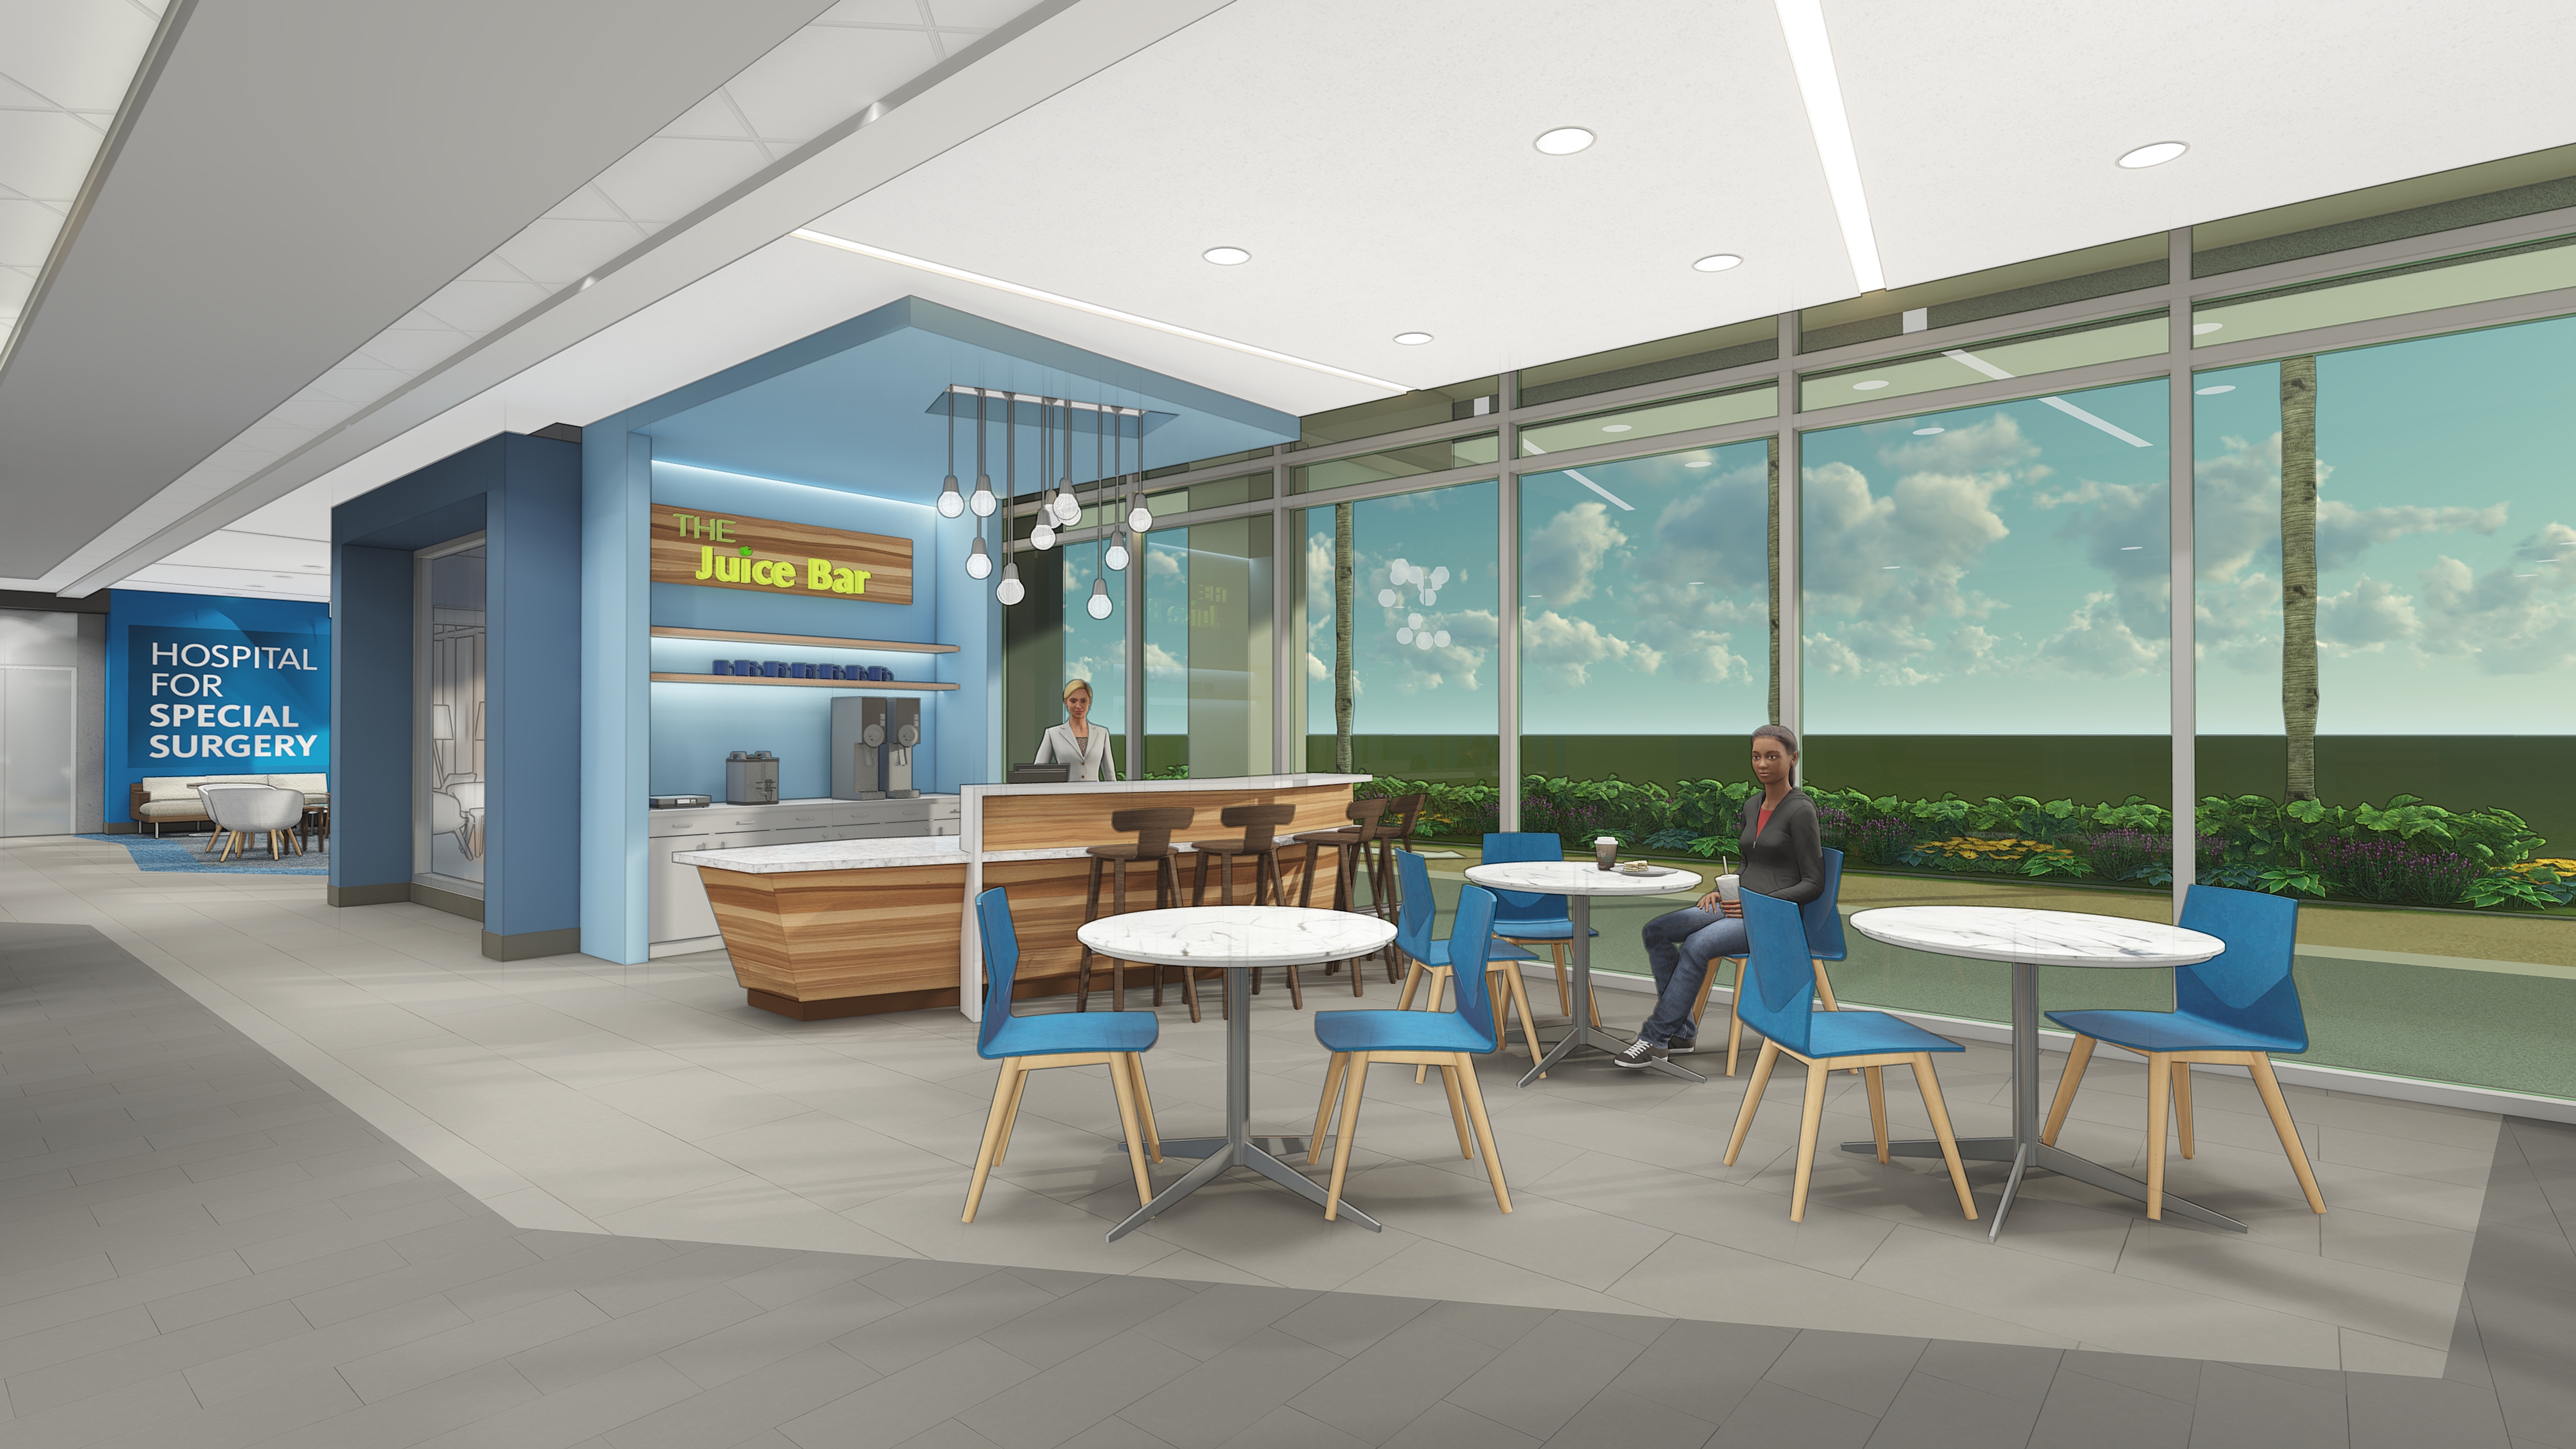 Artist's rendering of juice bar in hospital waiting area with cafe tables and large windows